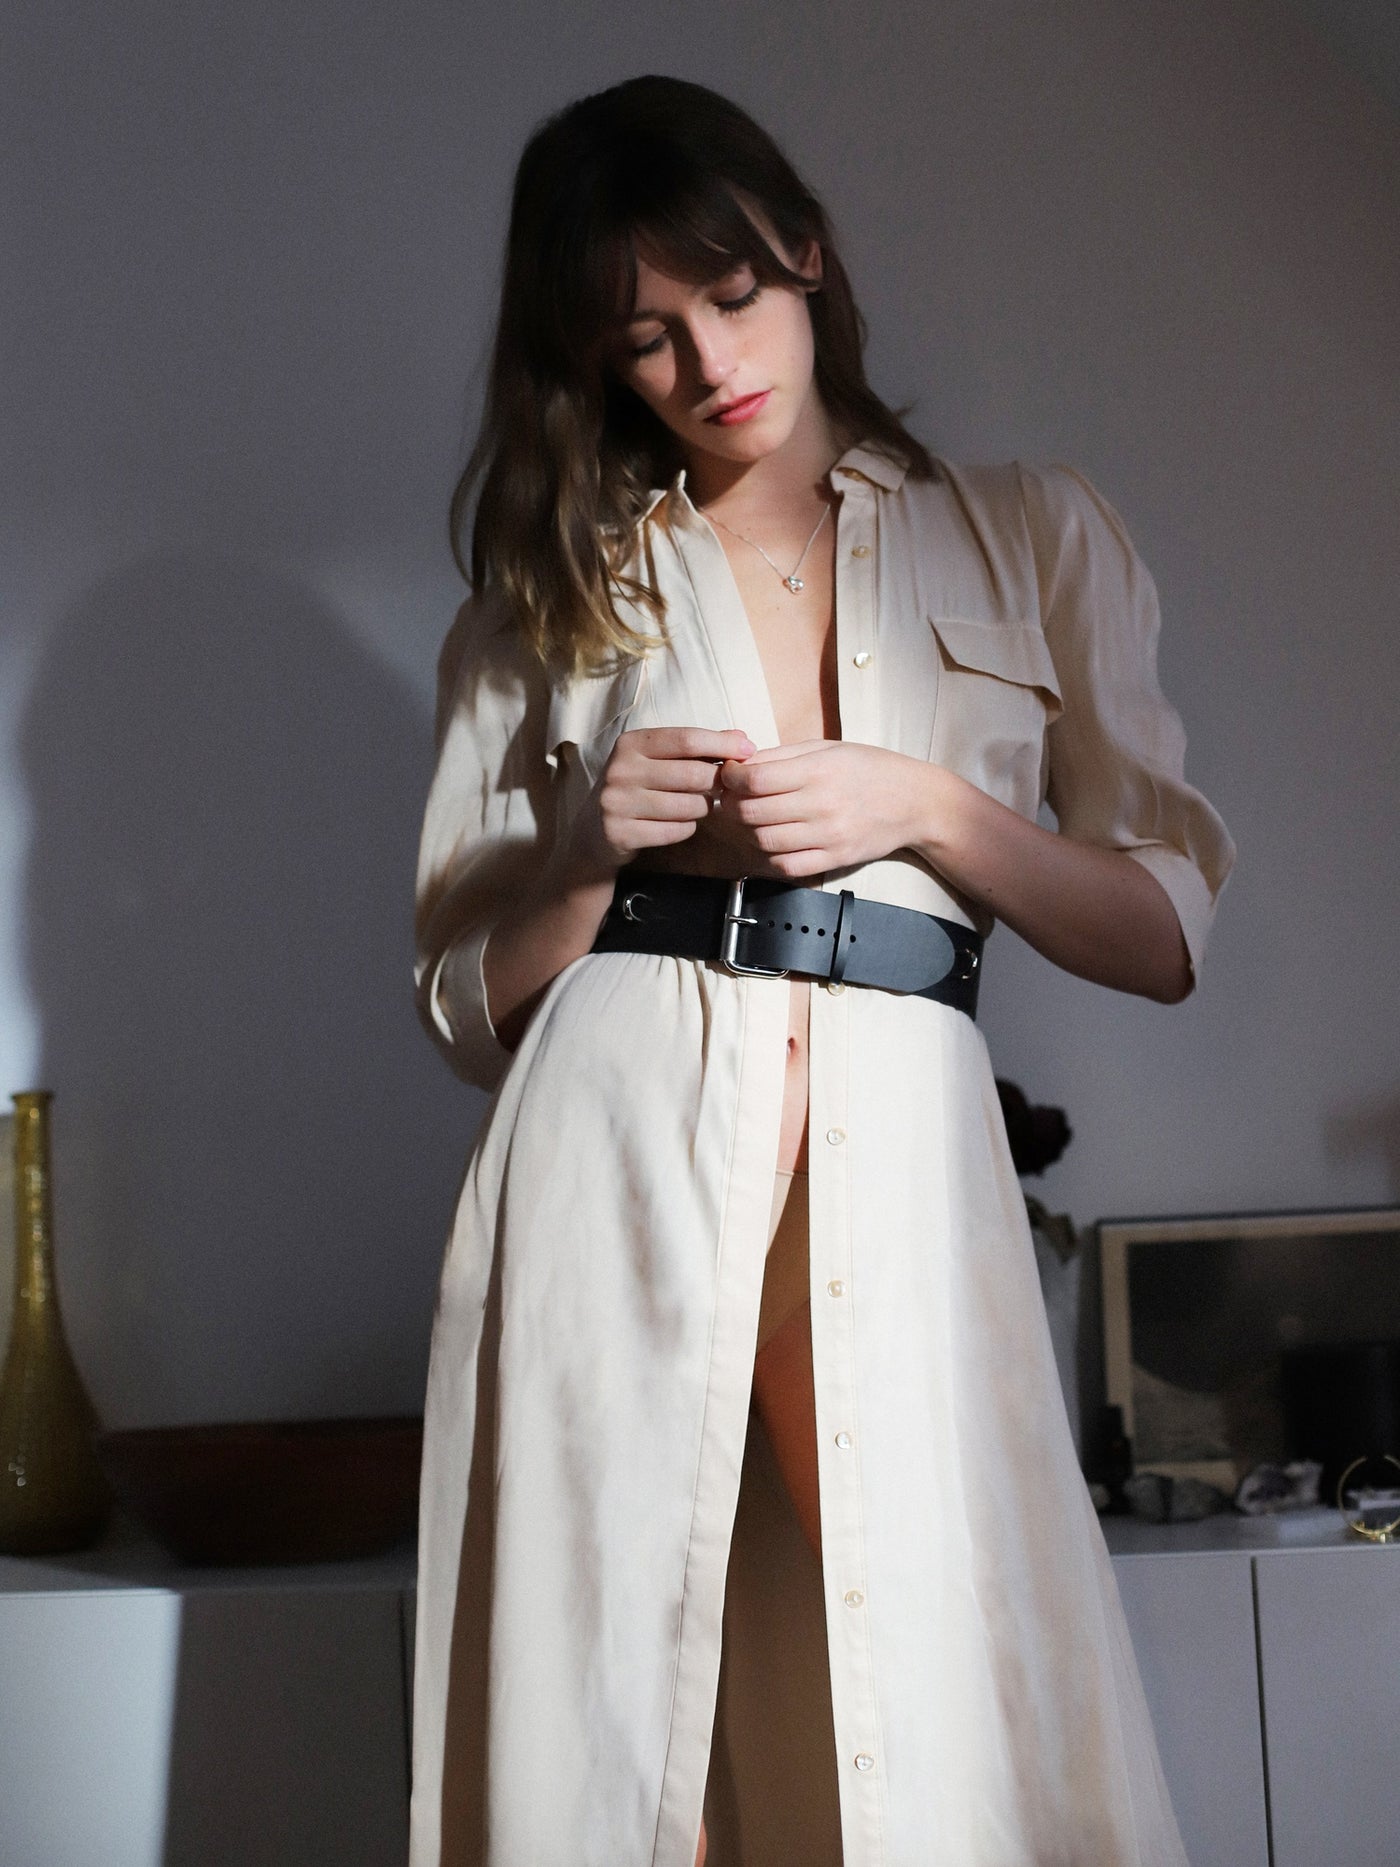 Noemie posing with the beautiful Jean belt around the waist by Baby turns Blue Paris